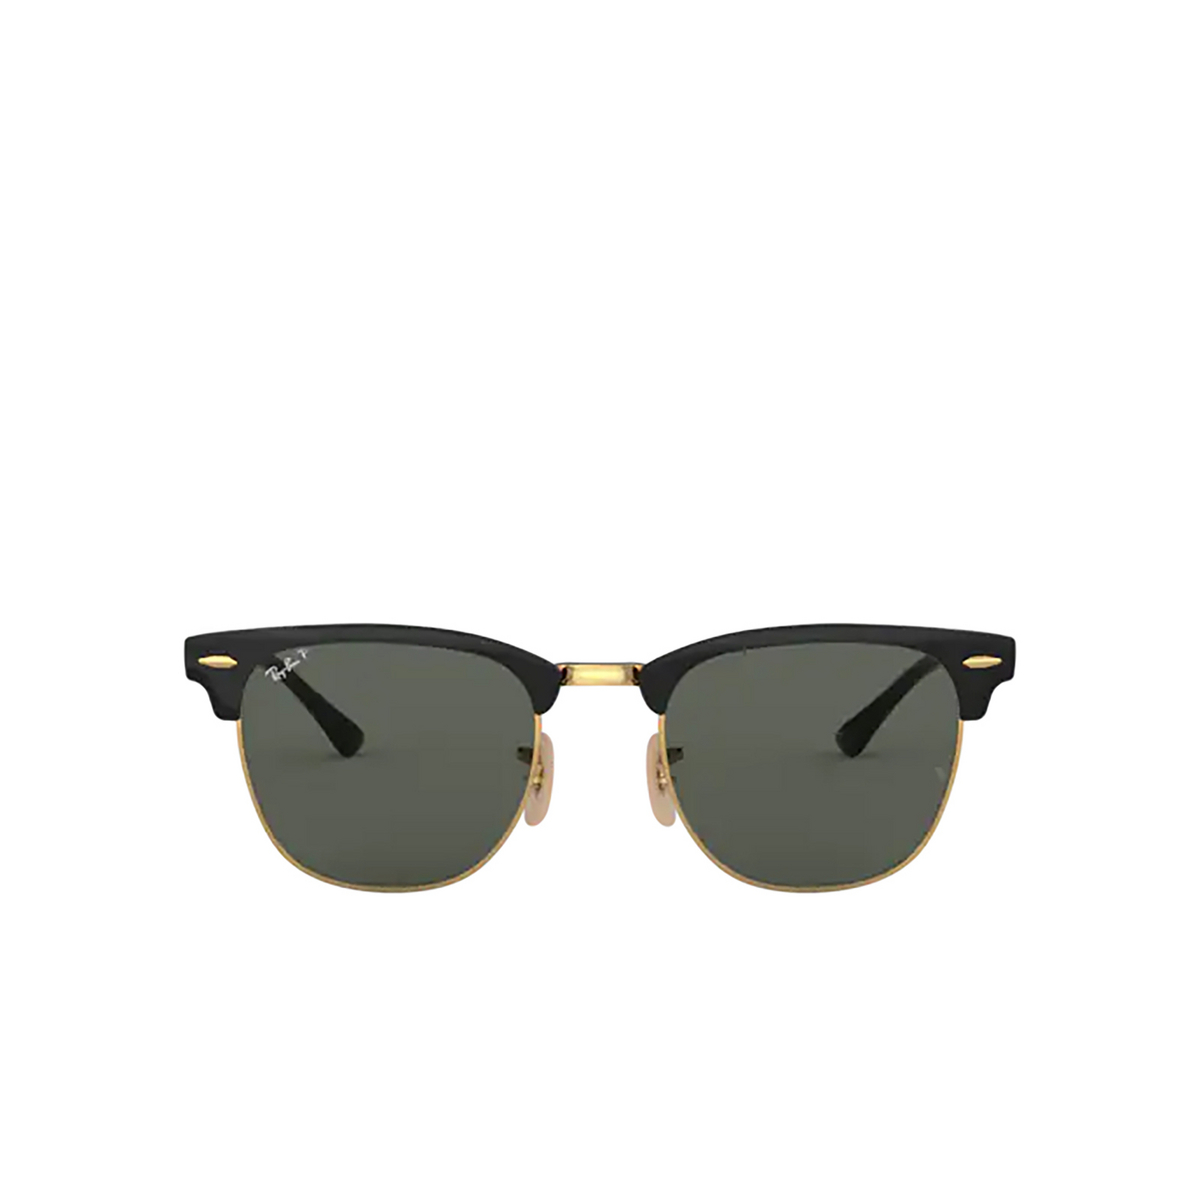 Ray-Ban CLUBMASTER METAL Sunglasses 187/58 Black - front view